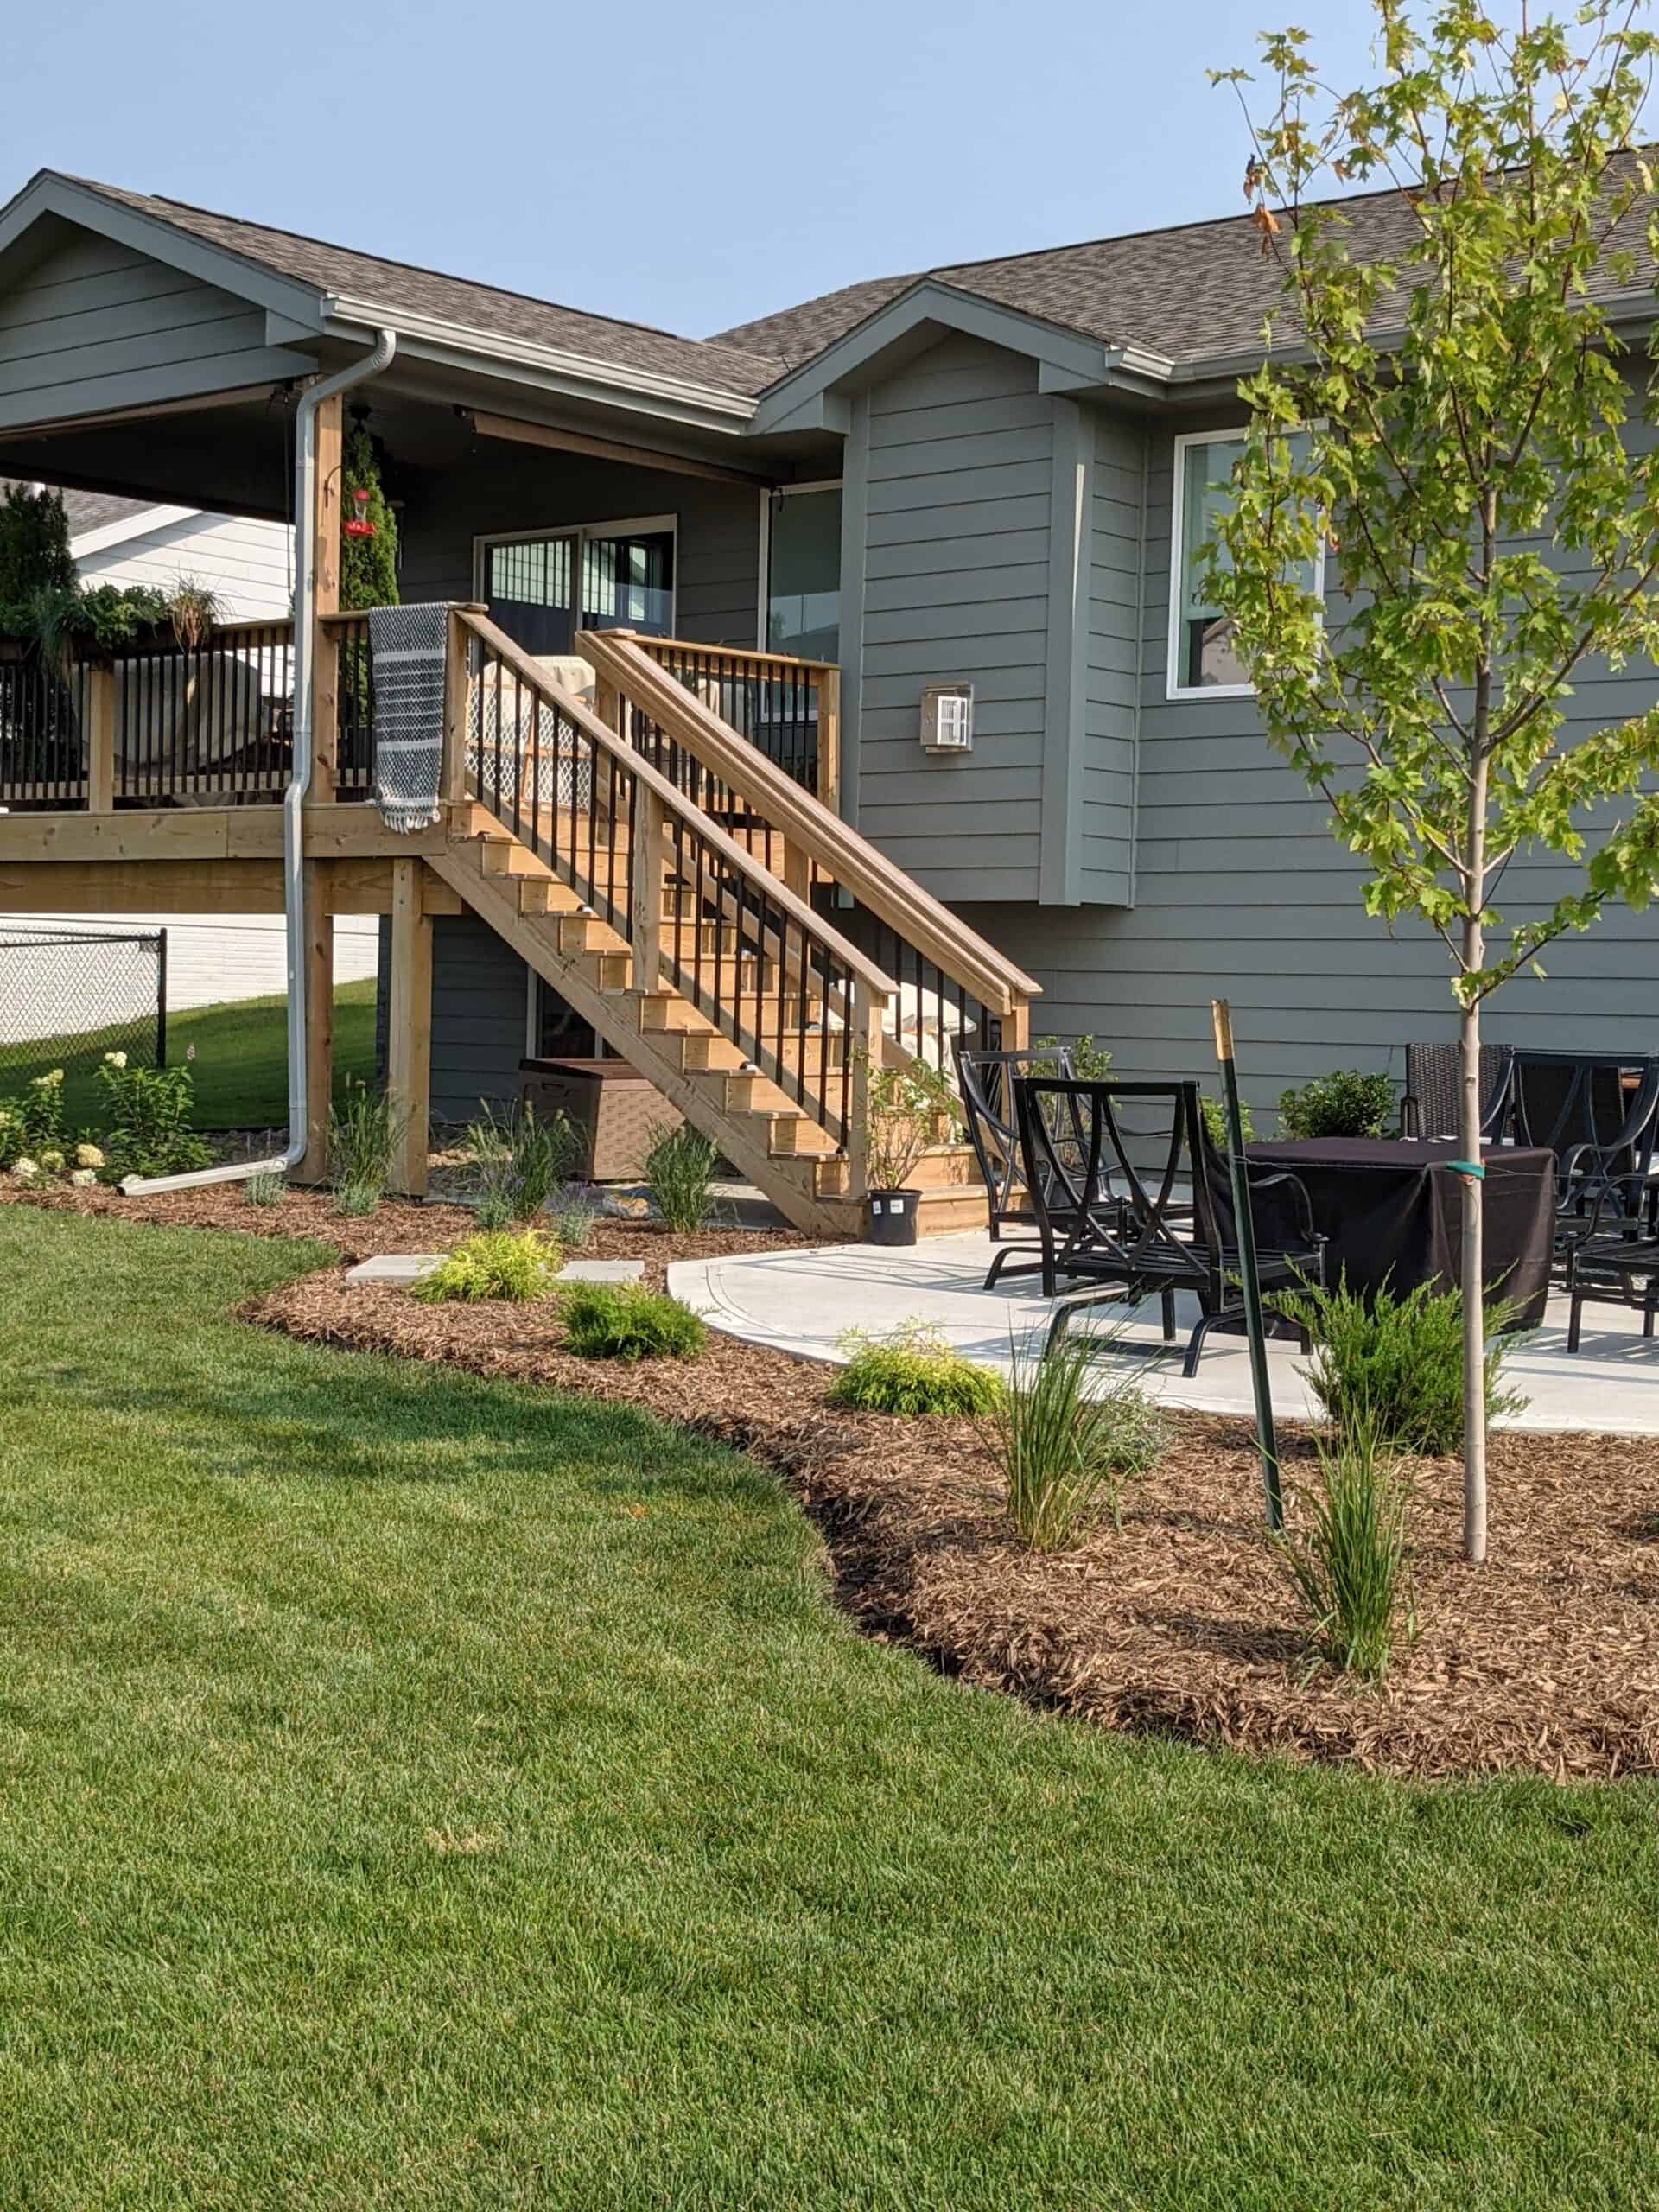 Spectacular lawn care services in Ankeny, Altoona, and Johnston, Iowa!